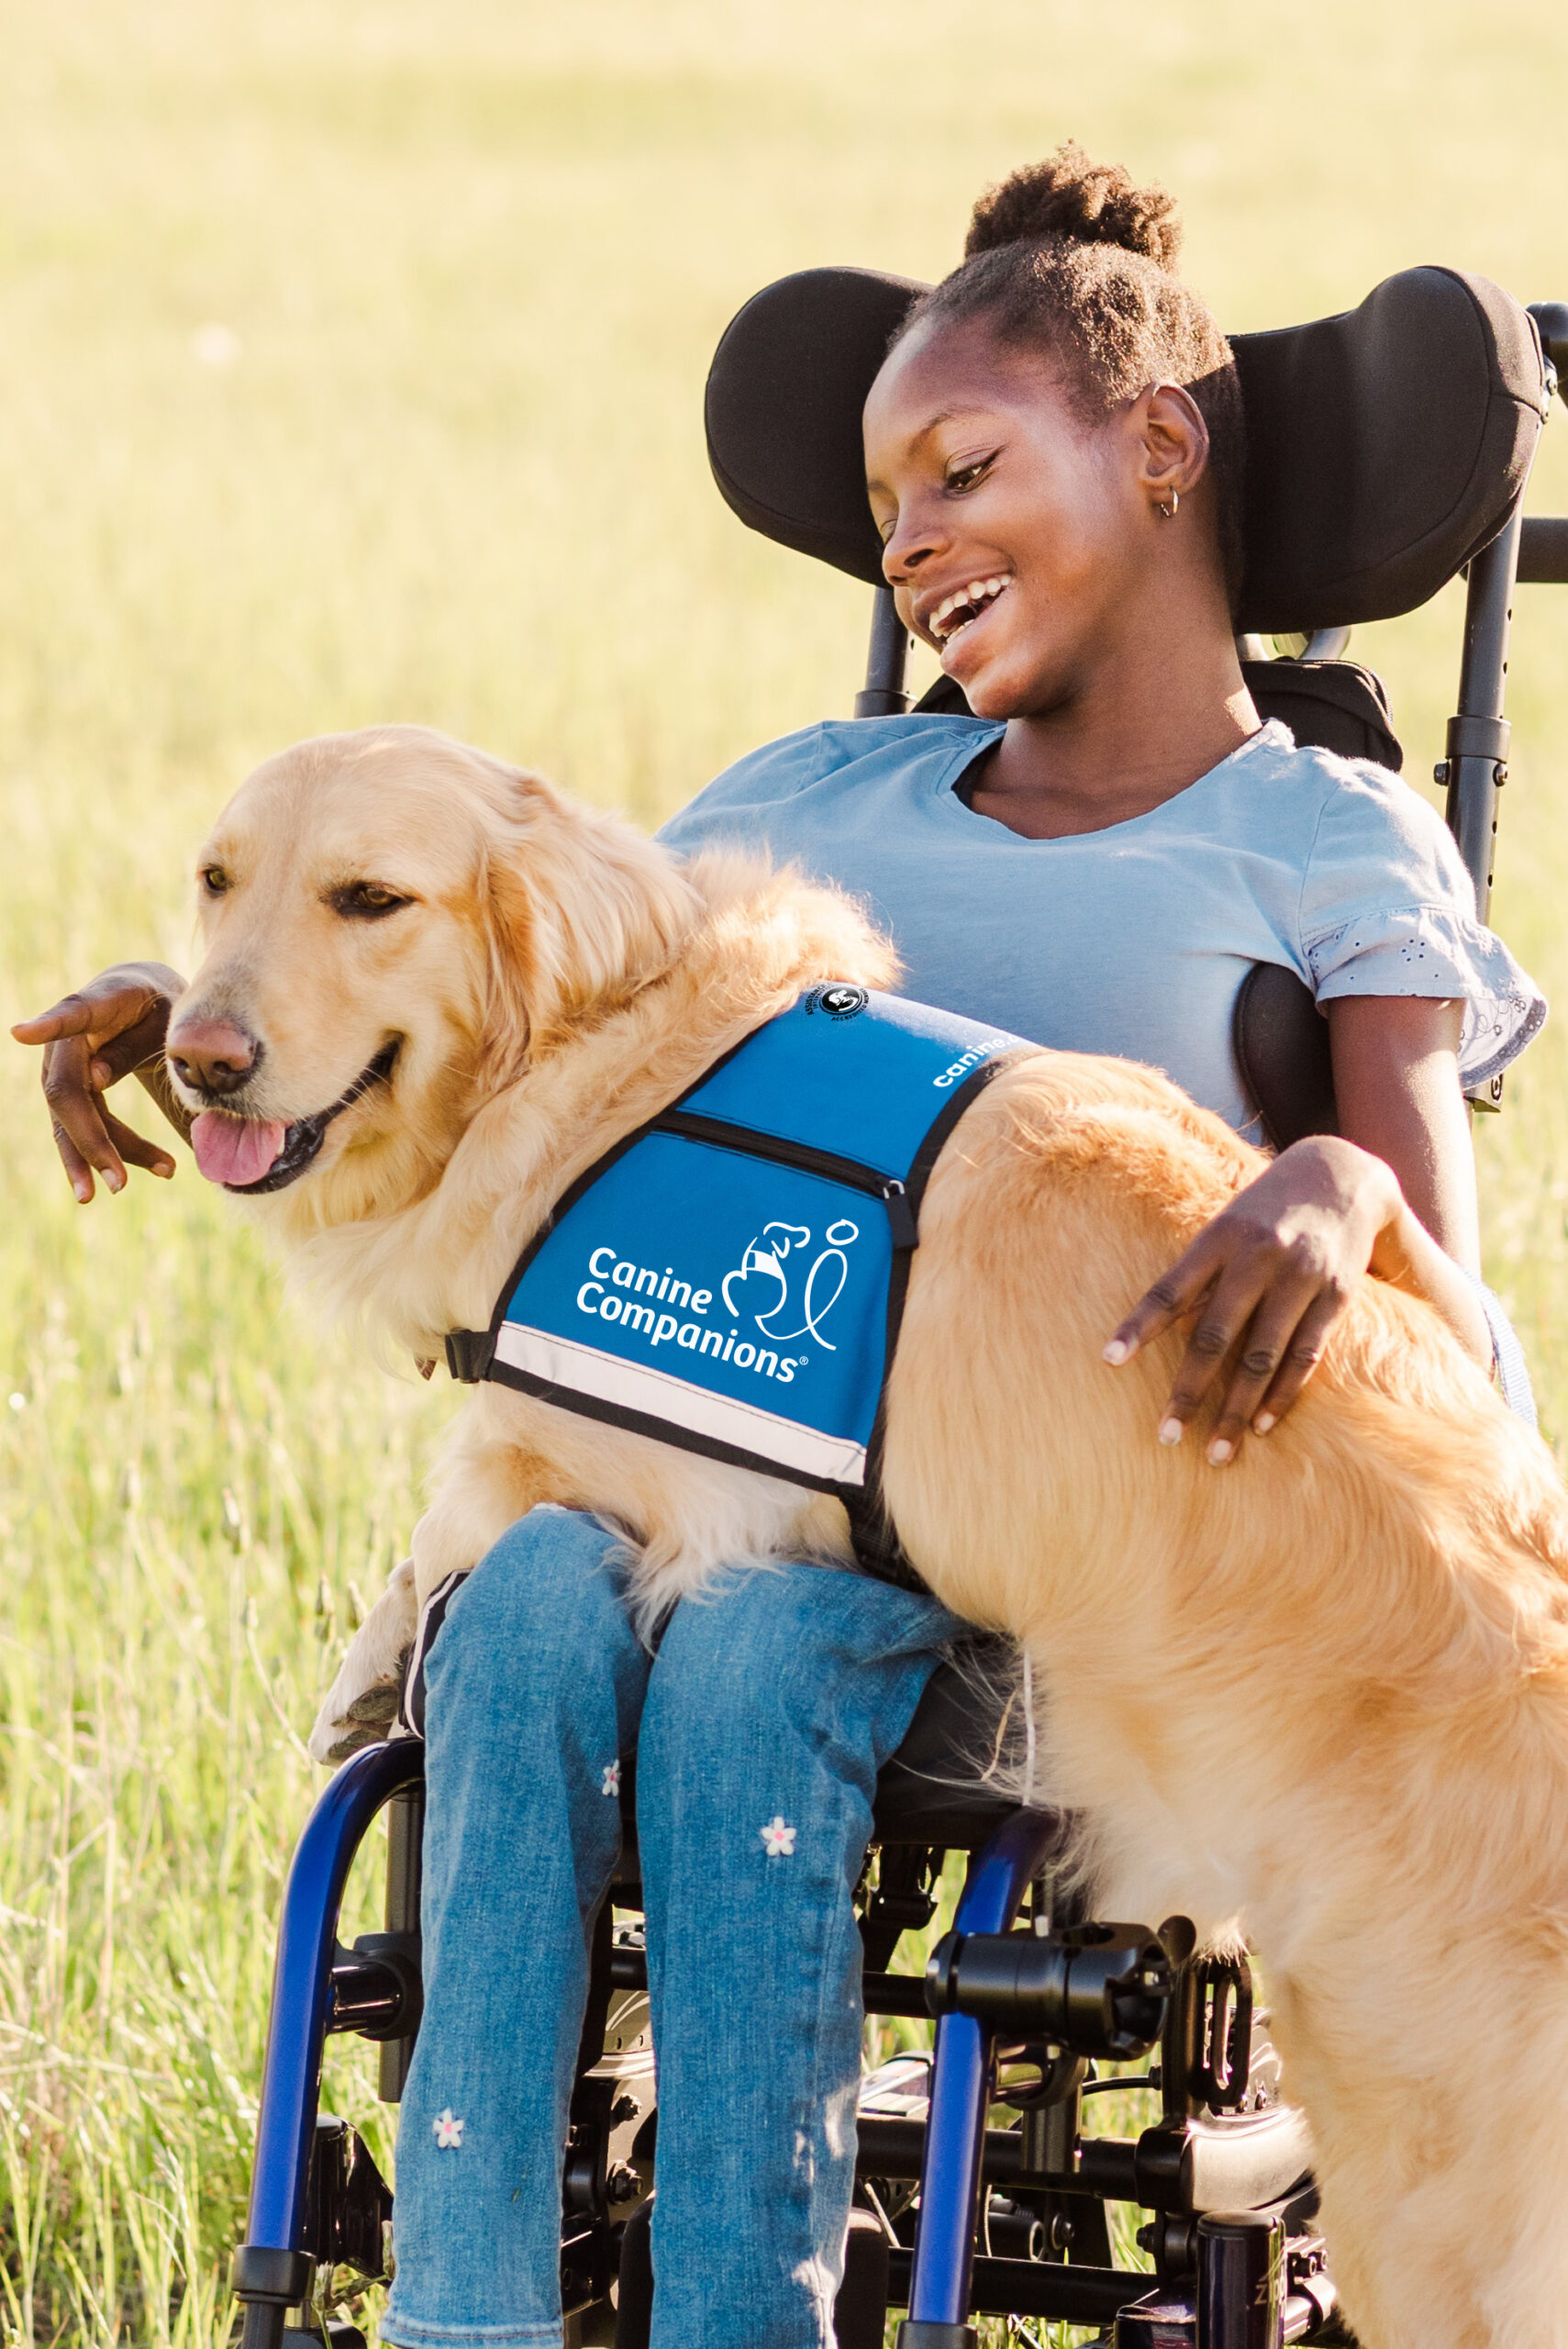 Girl in wheelchair smiling at a golden retriever dog sitting on her lap who is wearing a blue vest with the text Canine Companions